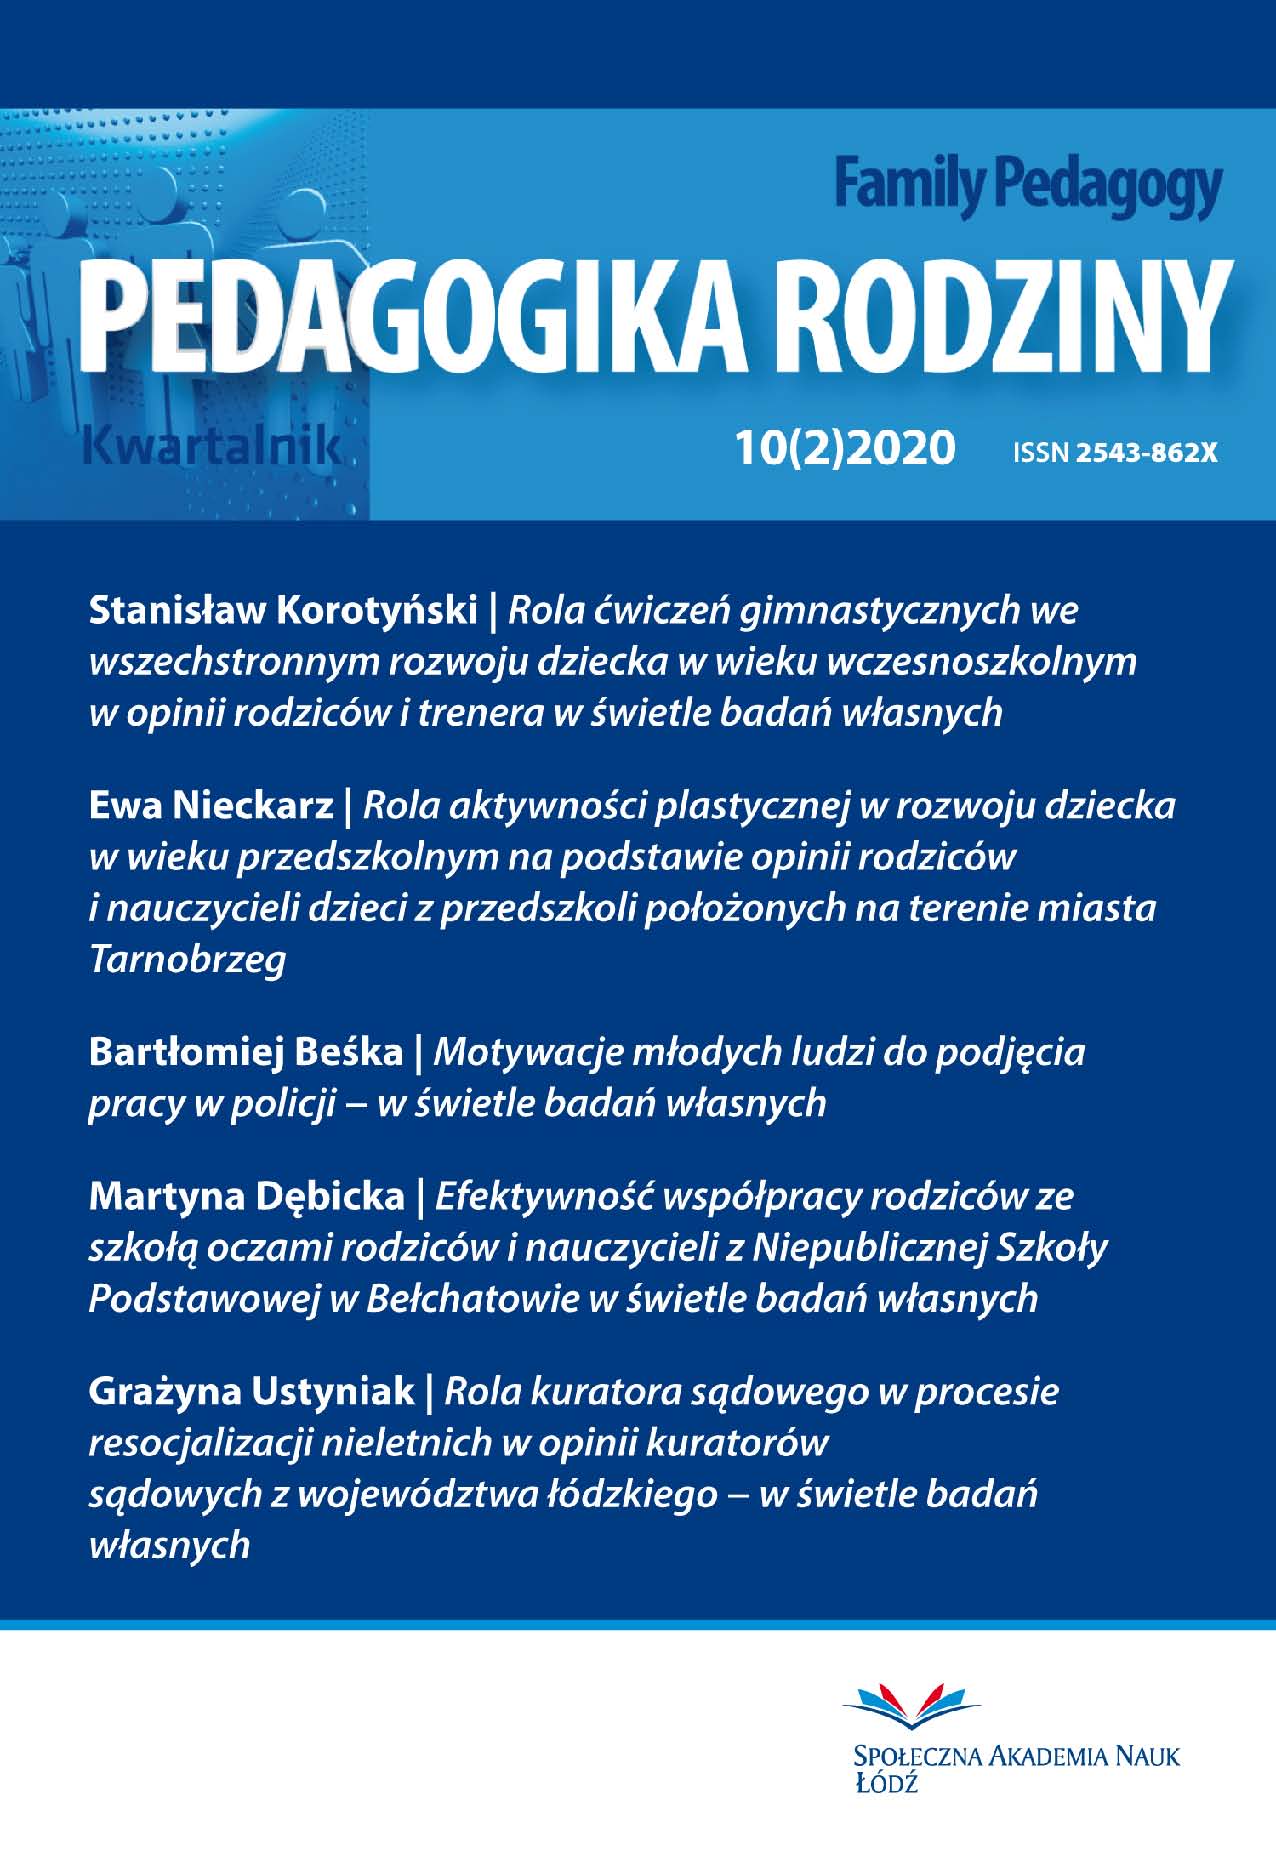 The Role and Tasks of Early Childhood Education Teachers
in Diagnosing the Educational Difficulties of Students
in Grades 1–3 in the Opinion of Parents and Teachers
of Primary School No. 5 in Zgierz in the Light of Own Research Cover Image